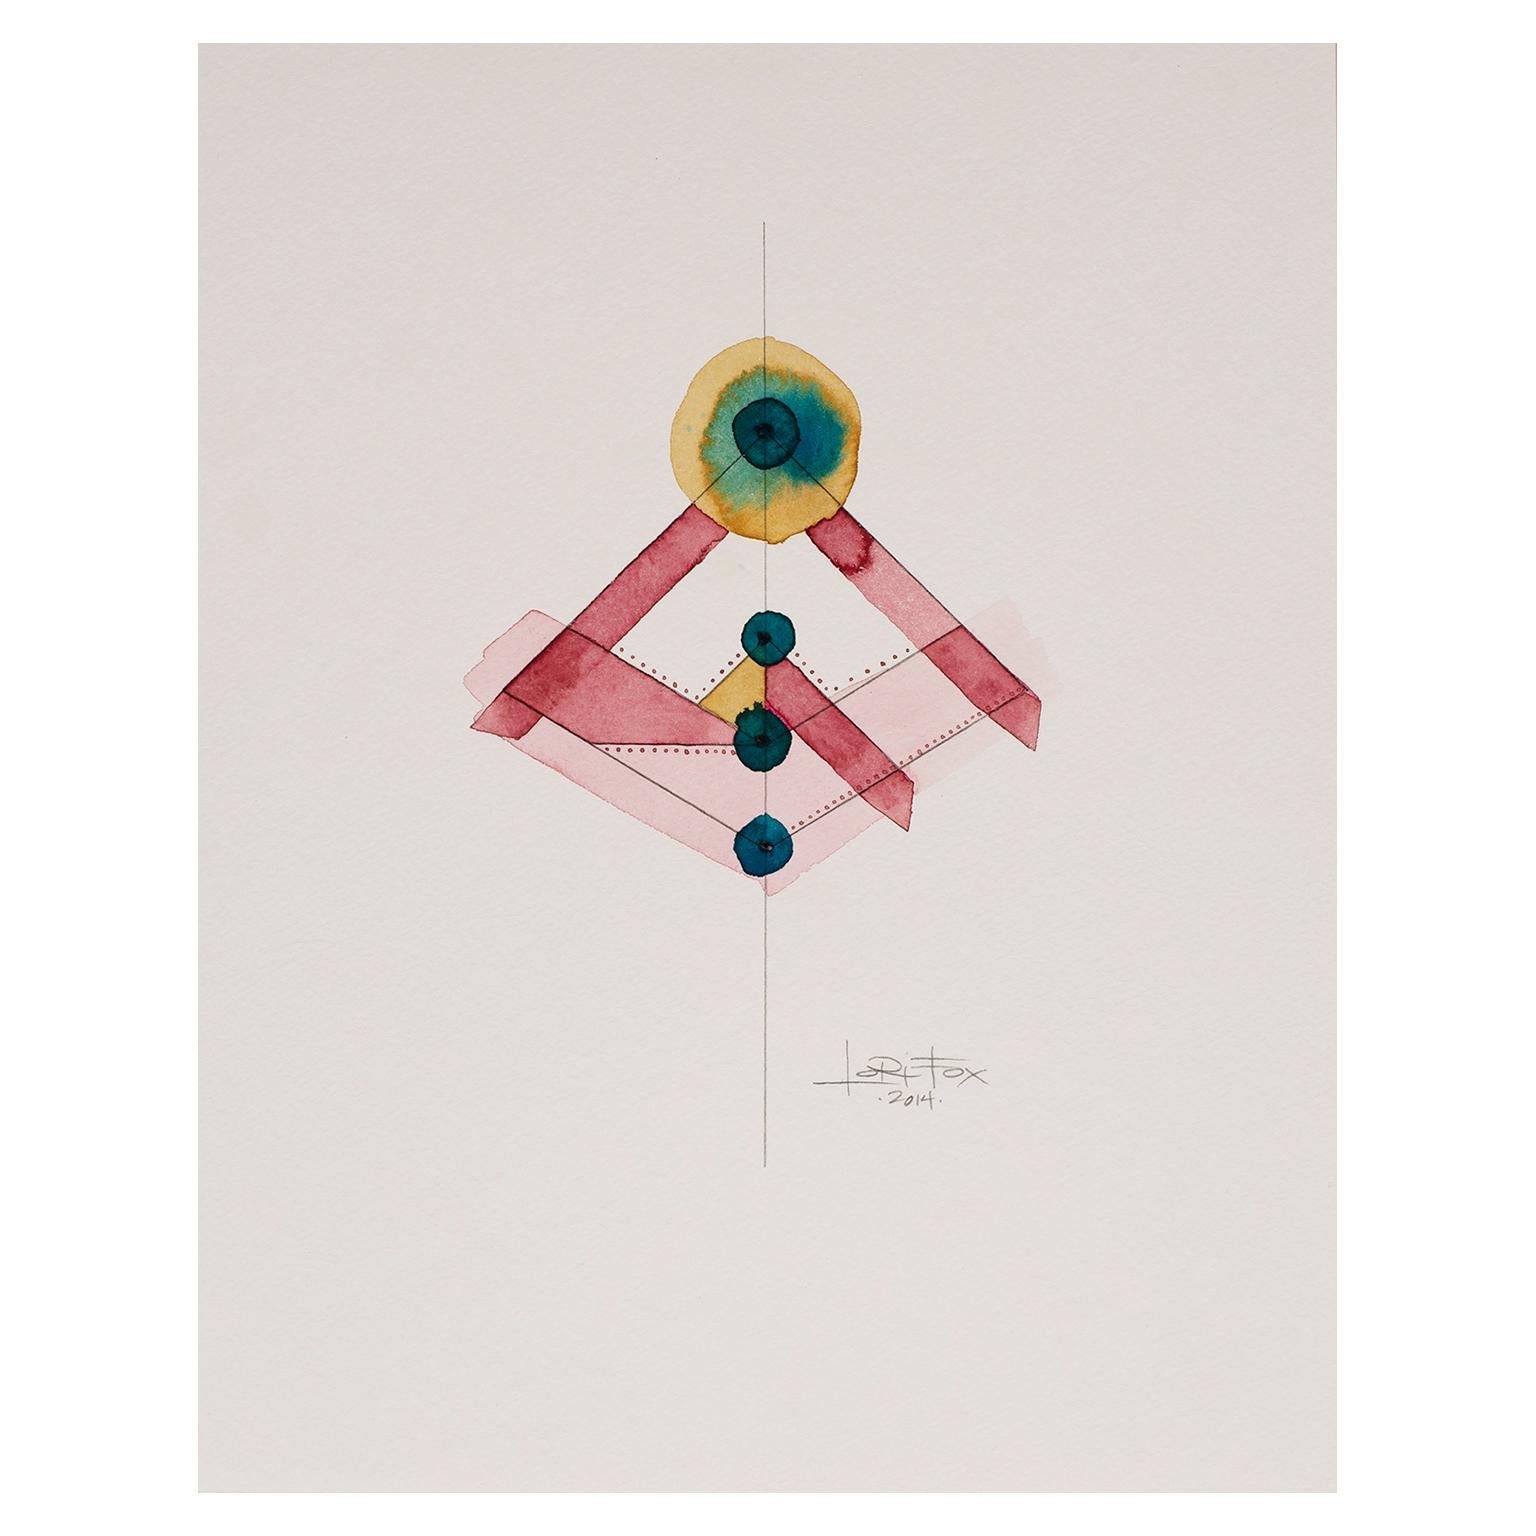 Totem 3.002 by Lori Fox. Red, Pink, Blue, Yellow gold, Teal watercolor on paper im Angebot 1